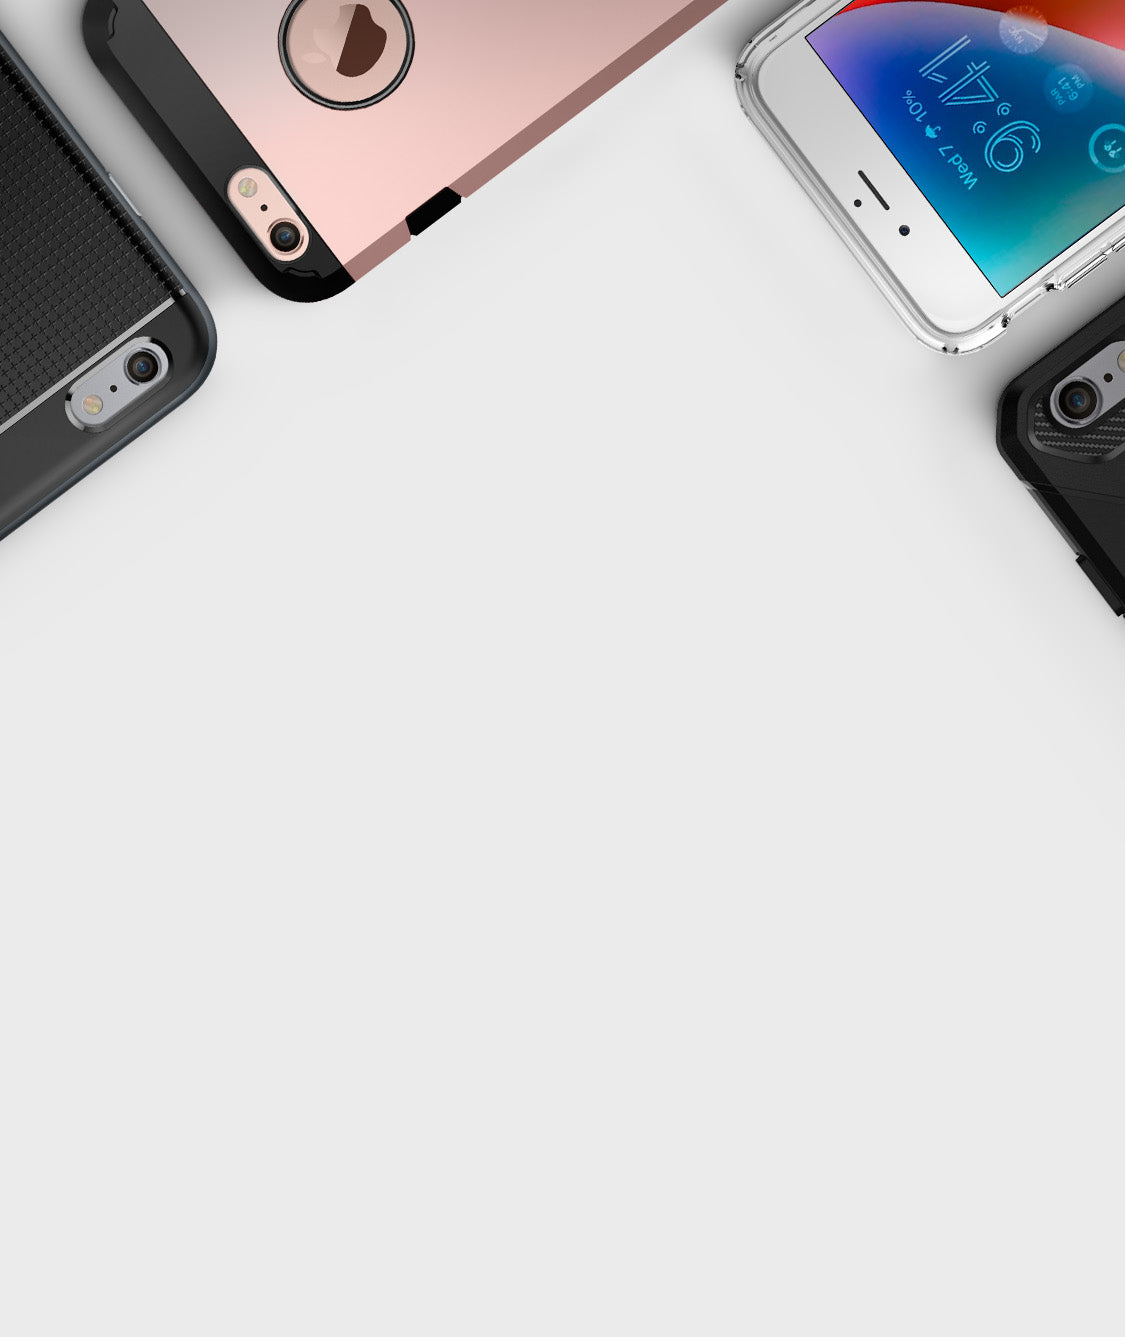 Here's Why Spigen Is The King of iPhone Cases - Tech Advisor